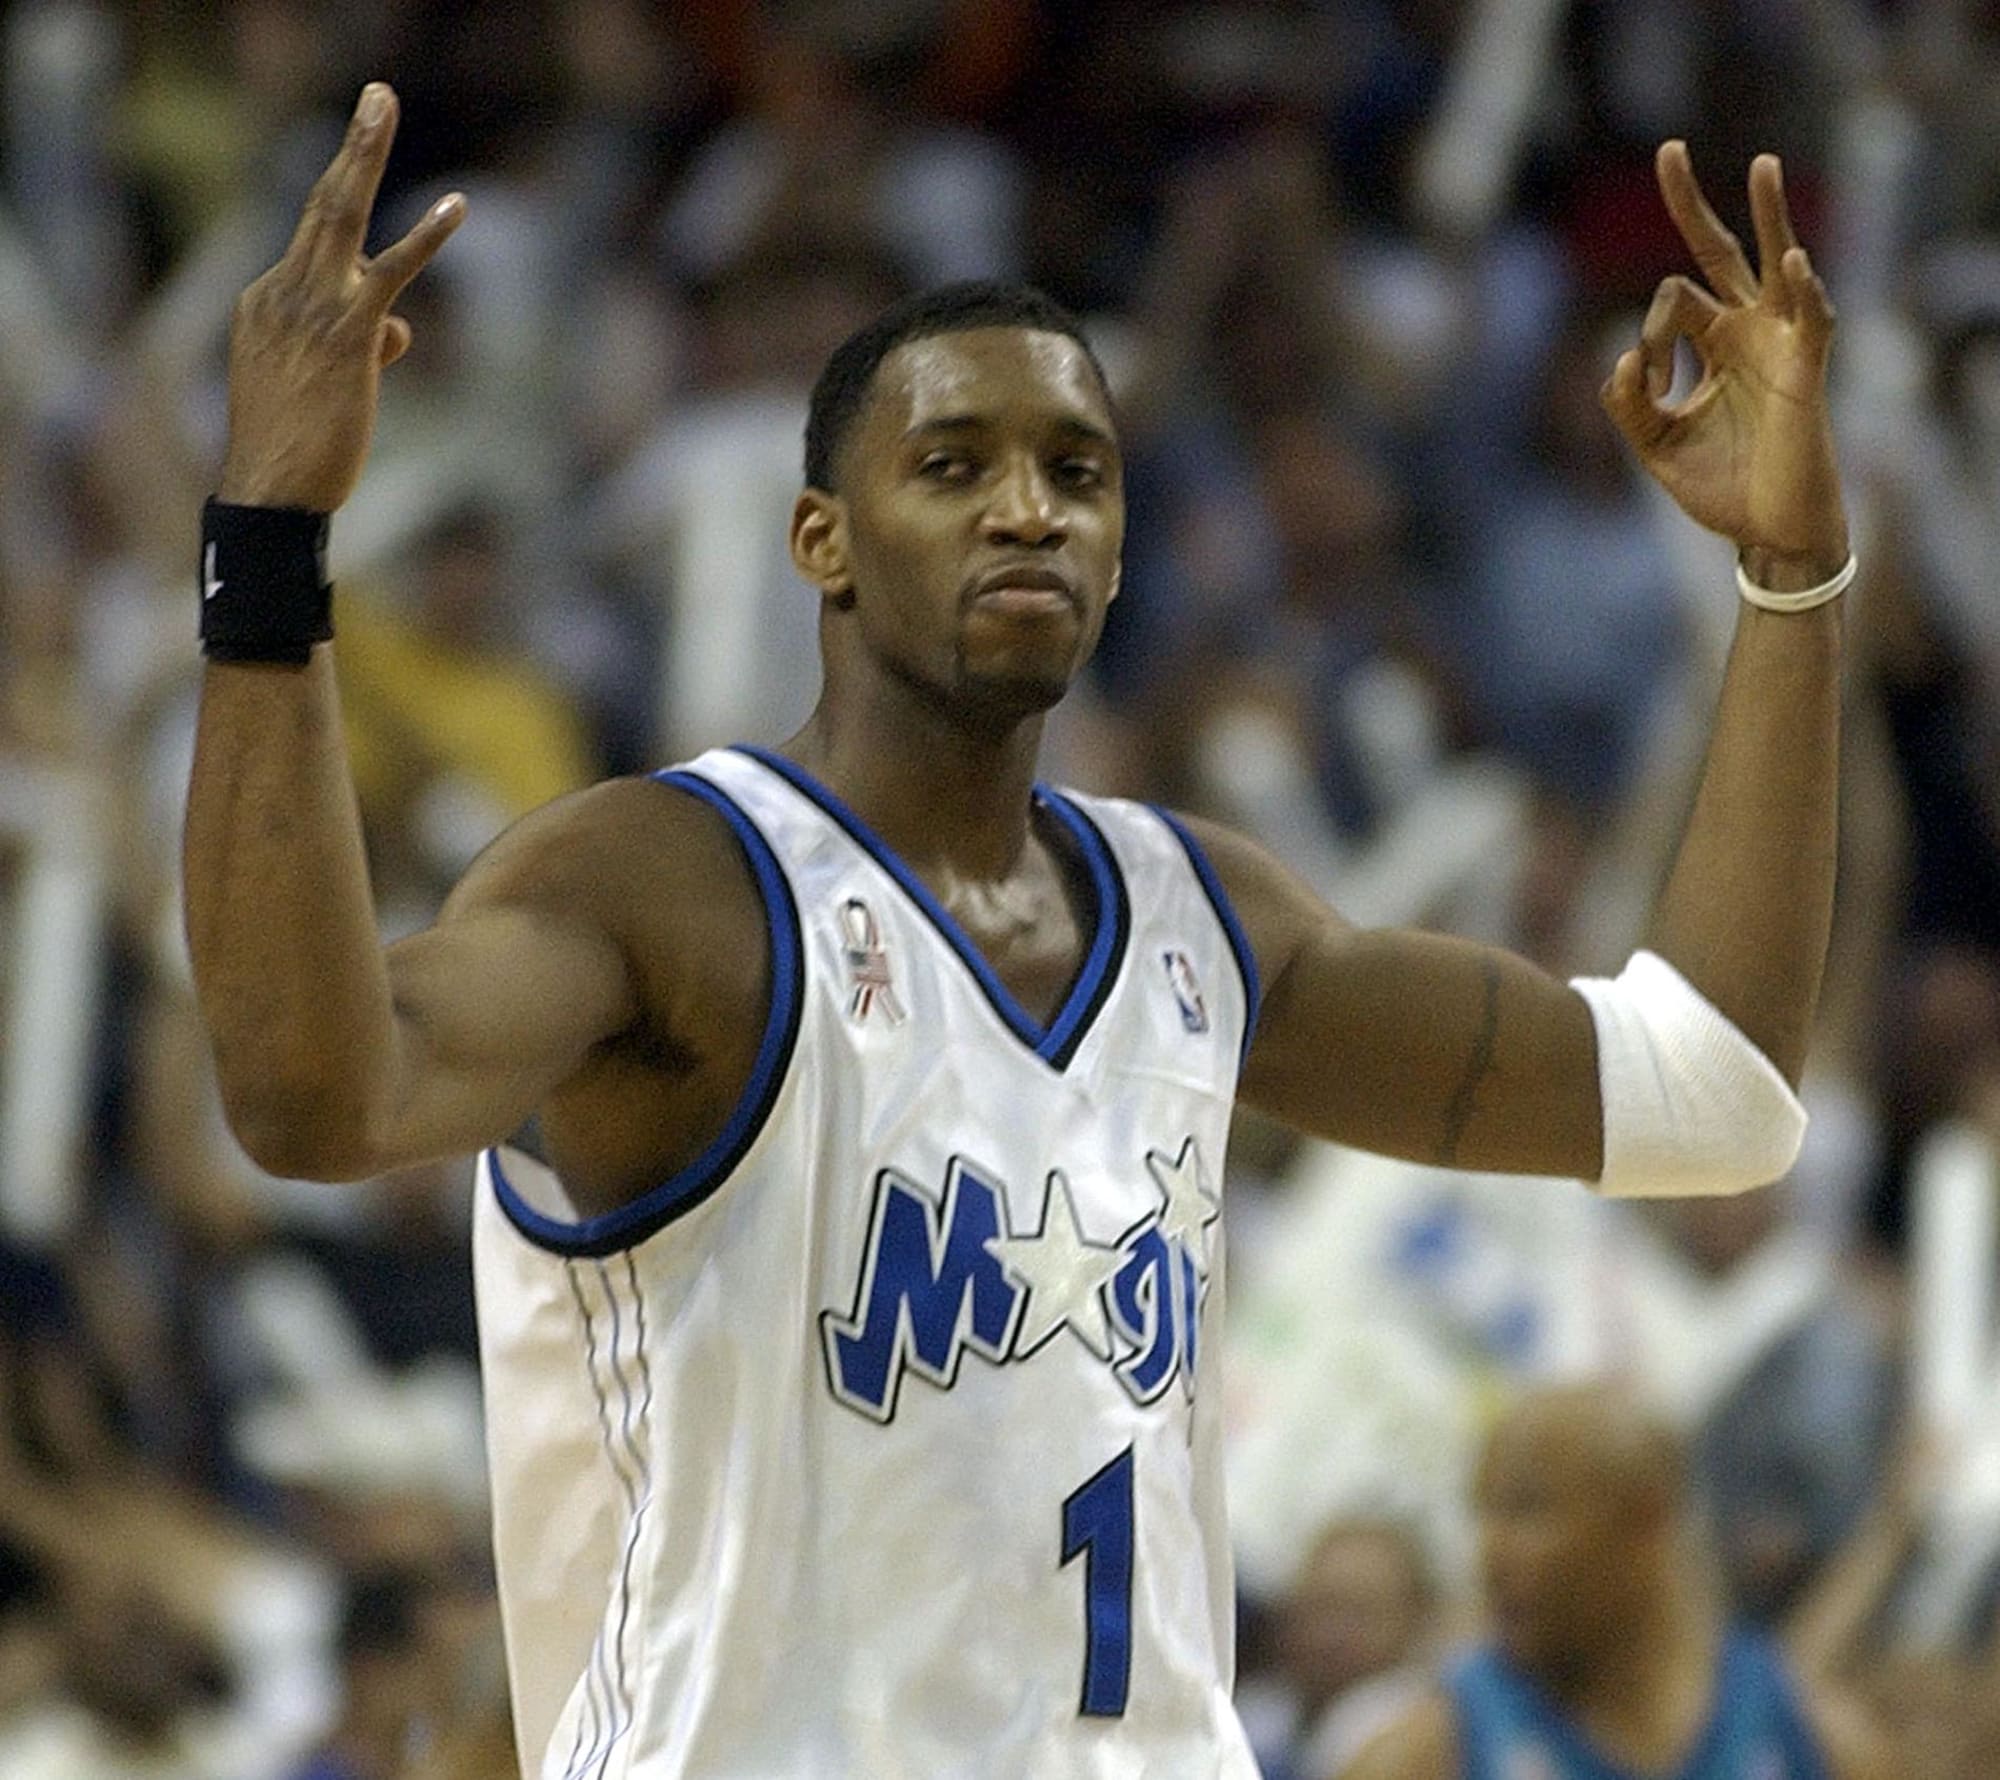 Teaching Students About Tracy Mcgrady - The Edvocate